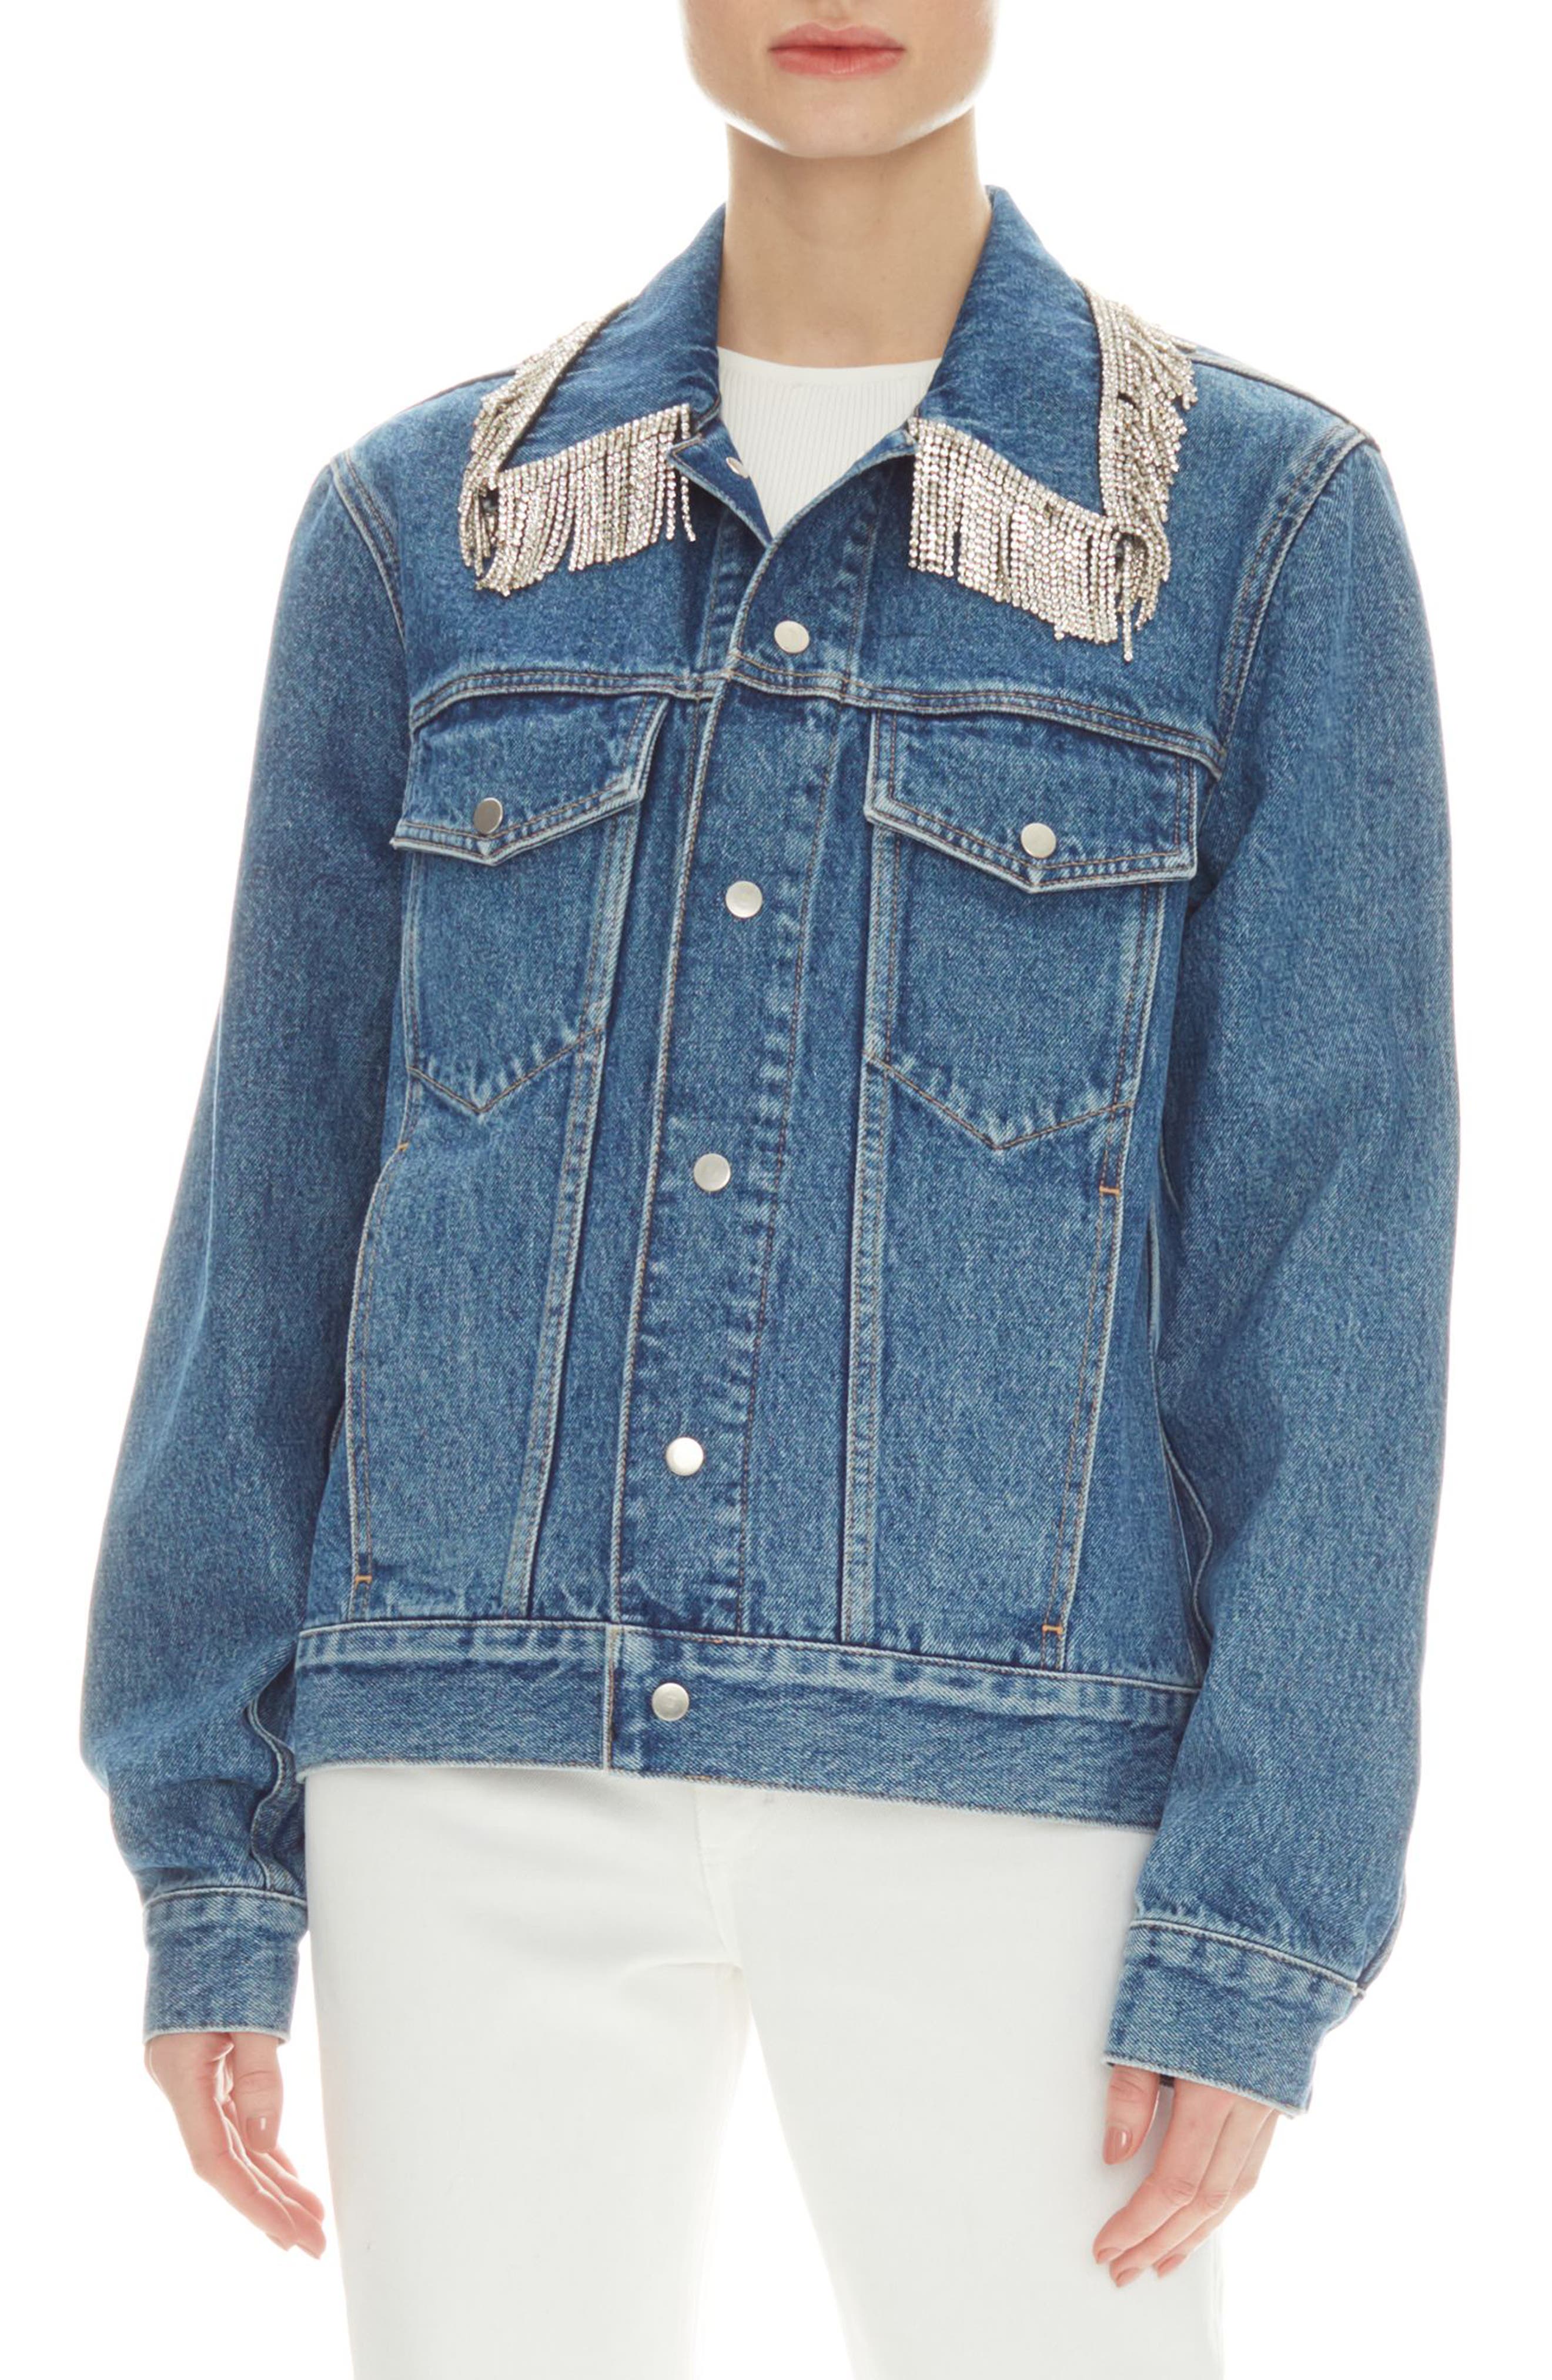 jean jacket with bling